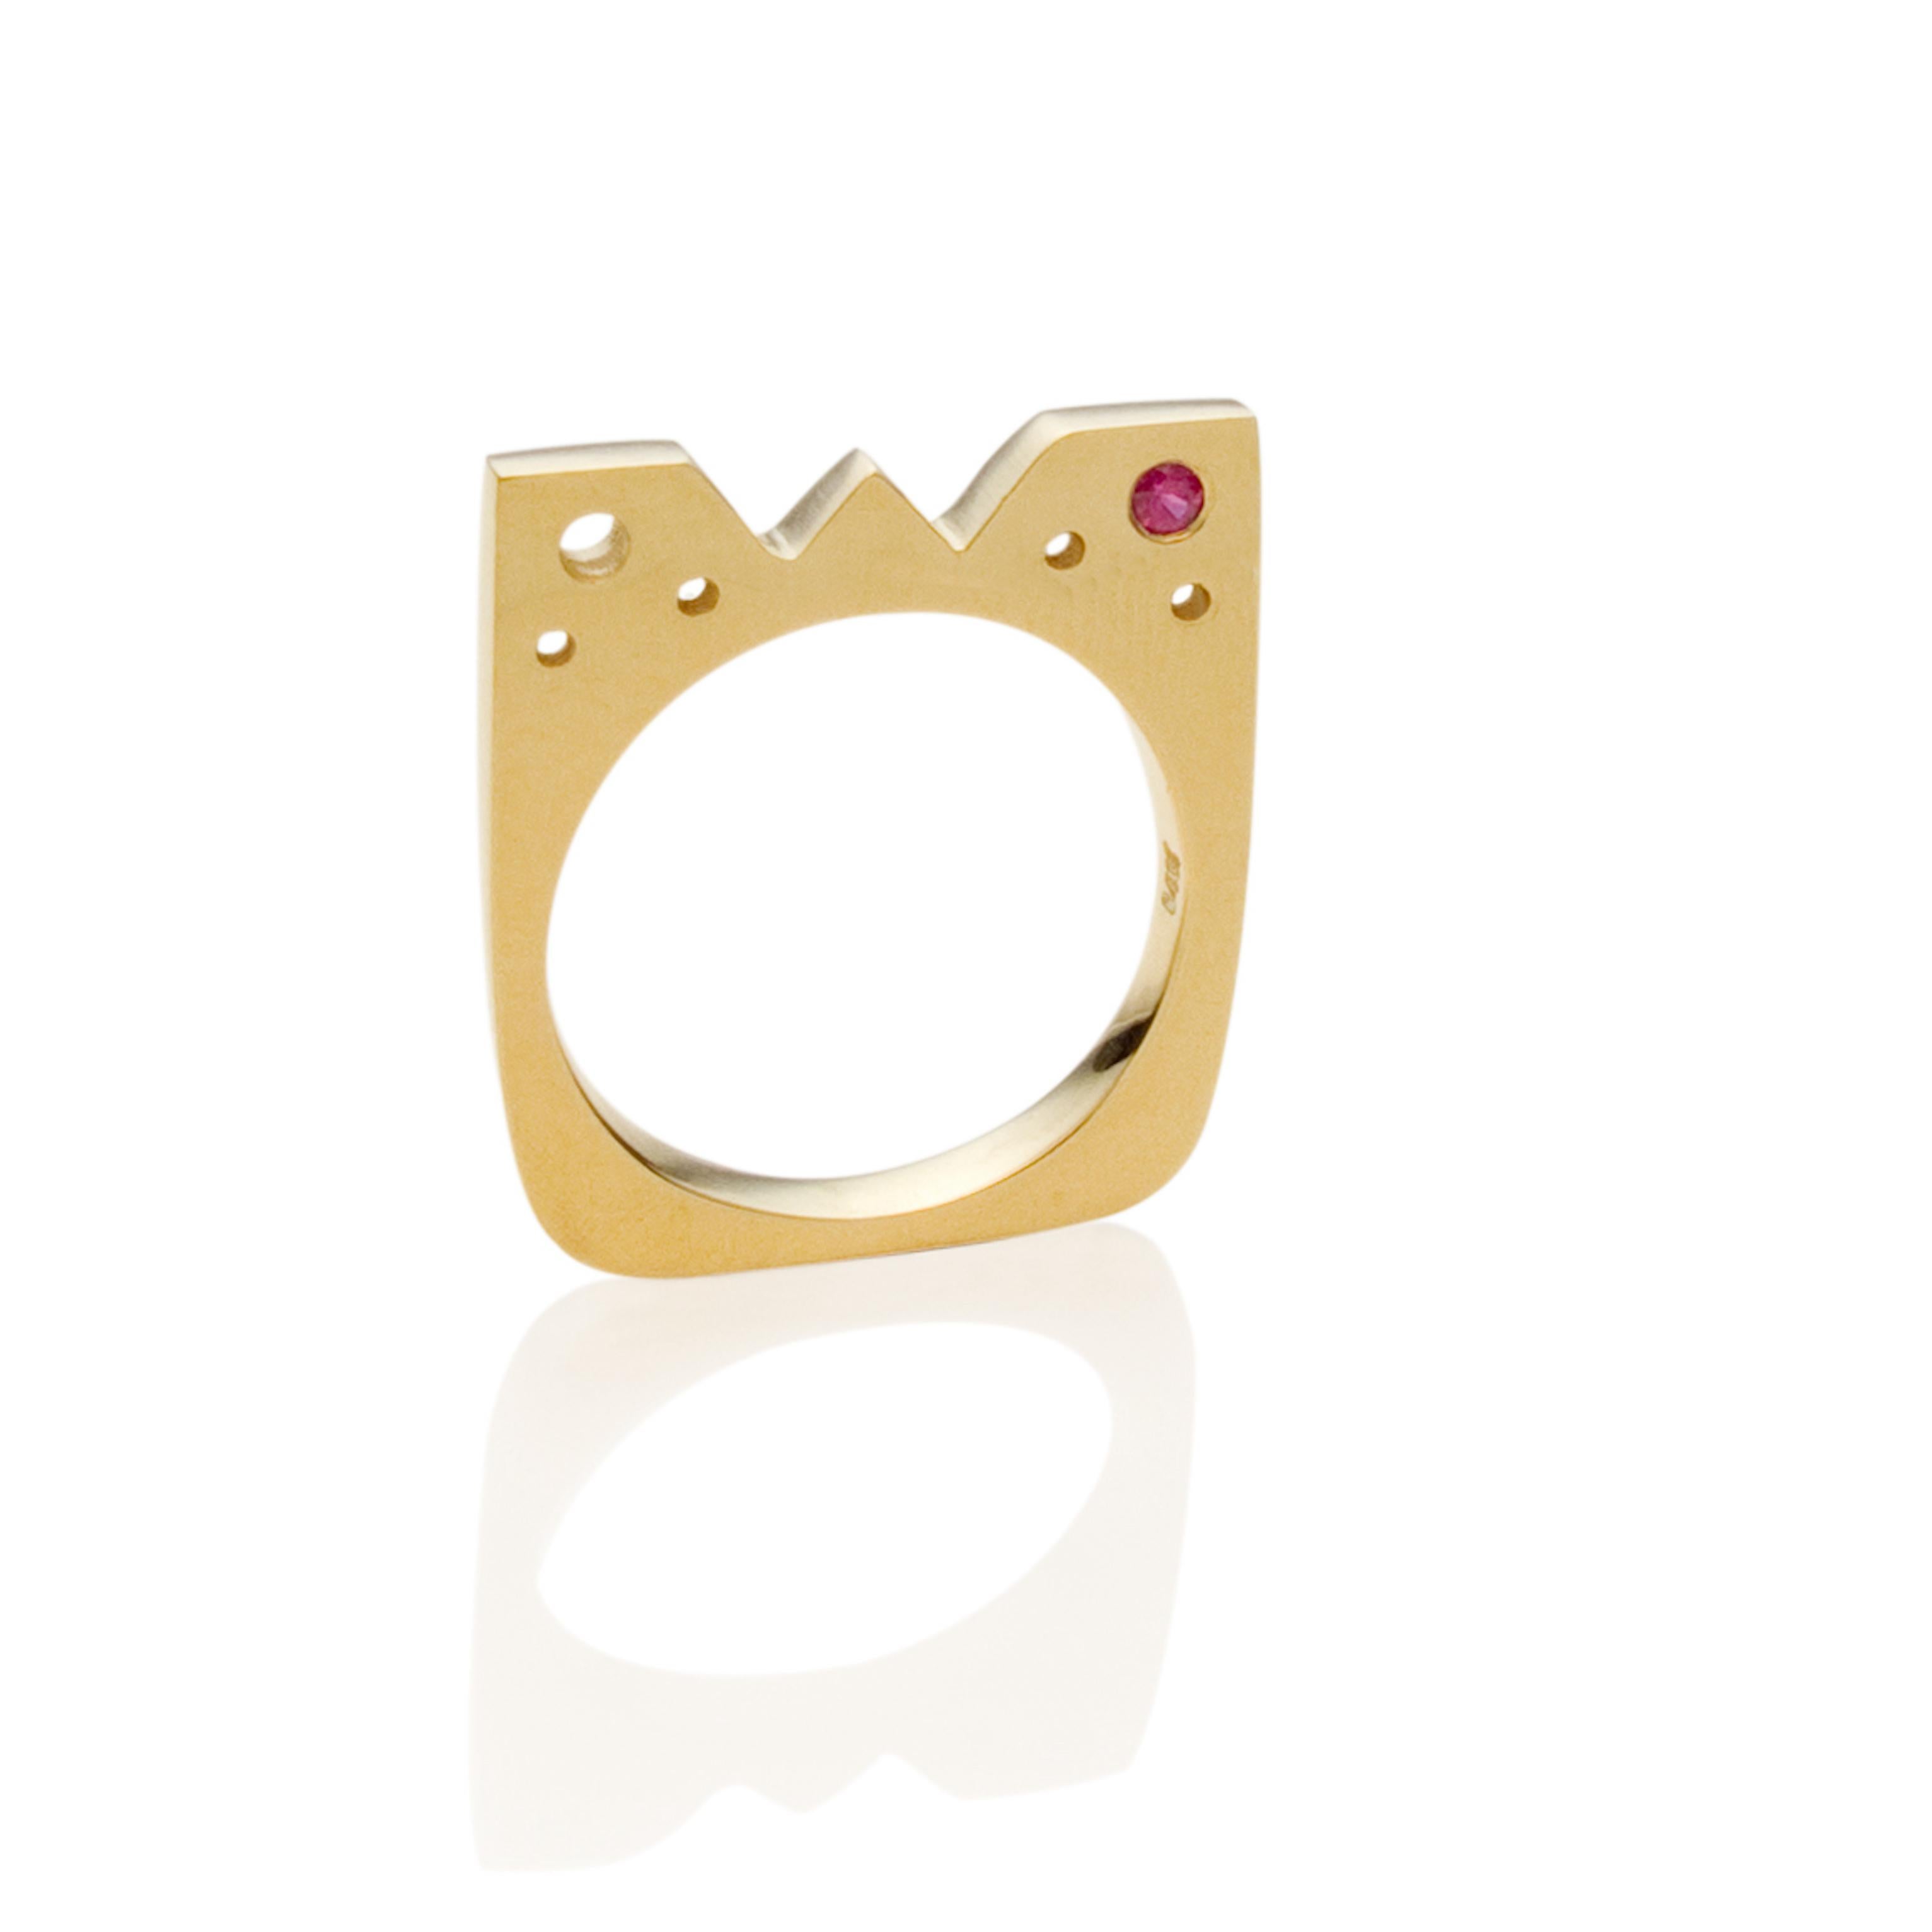 Our Square Flat Ring in yellow gold with a dark pink Sapphire is for you – designed to be different and as a daily reminder that we are the owners of our lives and our own little kingdoms.

The Flat Ring Collection part of our Modern Story